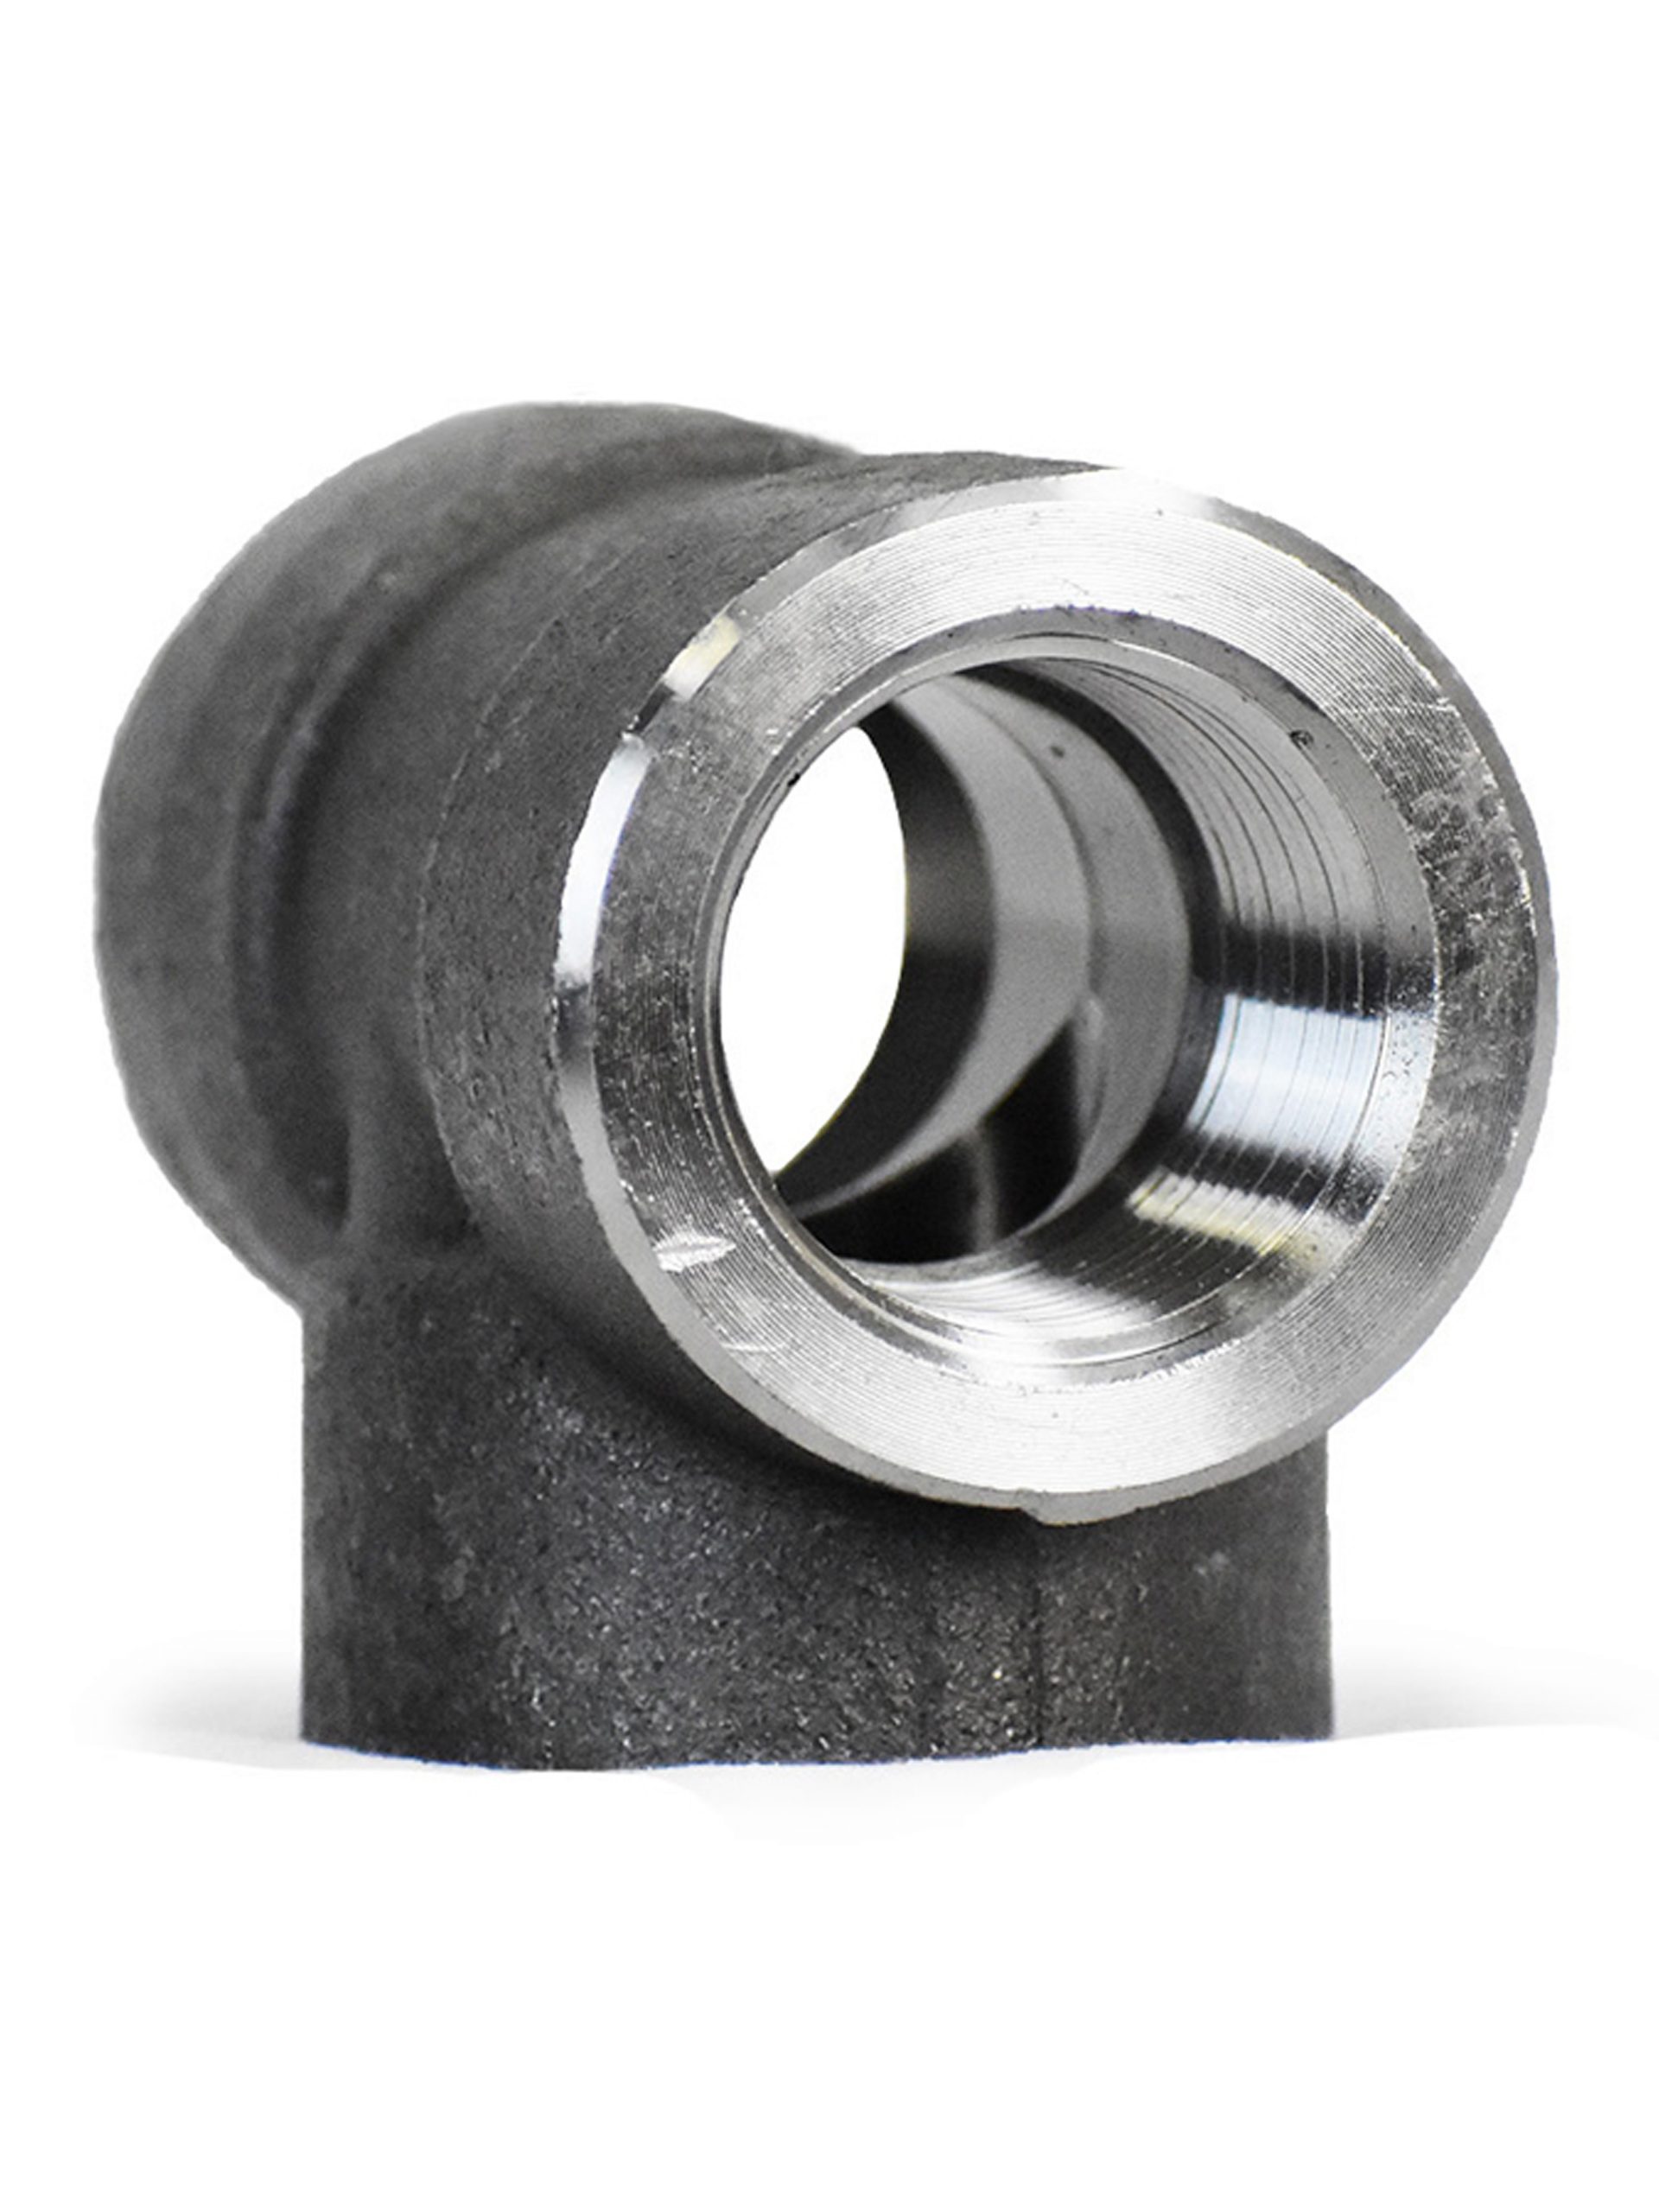 FORGED STEEL EQUAL TEE 2 Inches CLASS 2000 NPT from Gas Equipment Company Llc Abu Dhabi, UNITED ARAB EMIRATES